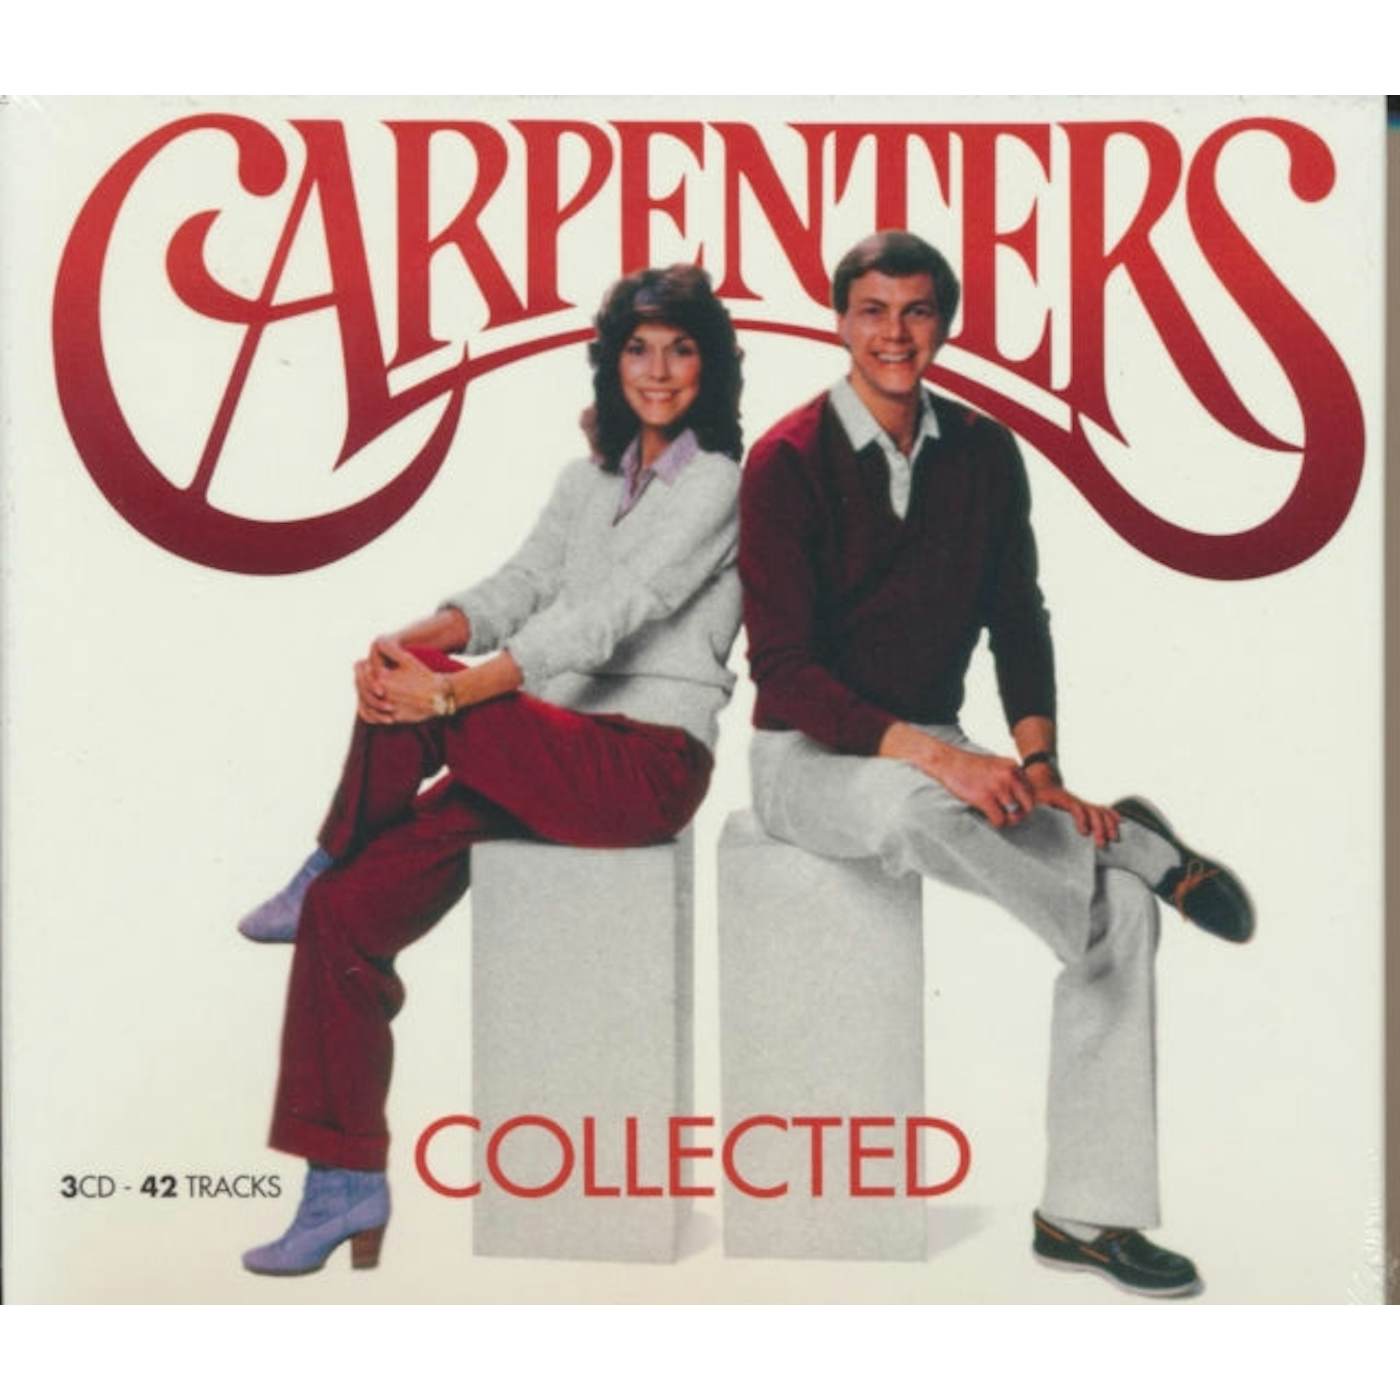 The Carpenters CD - Collected